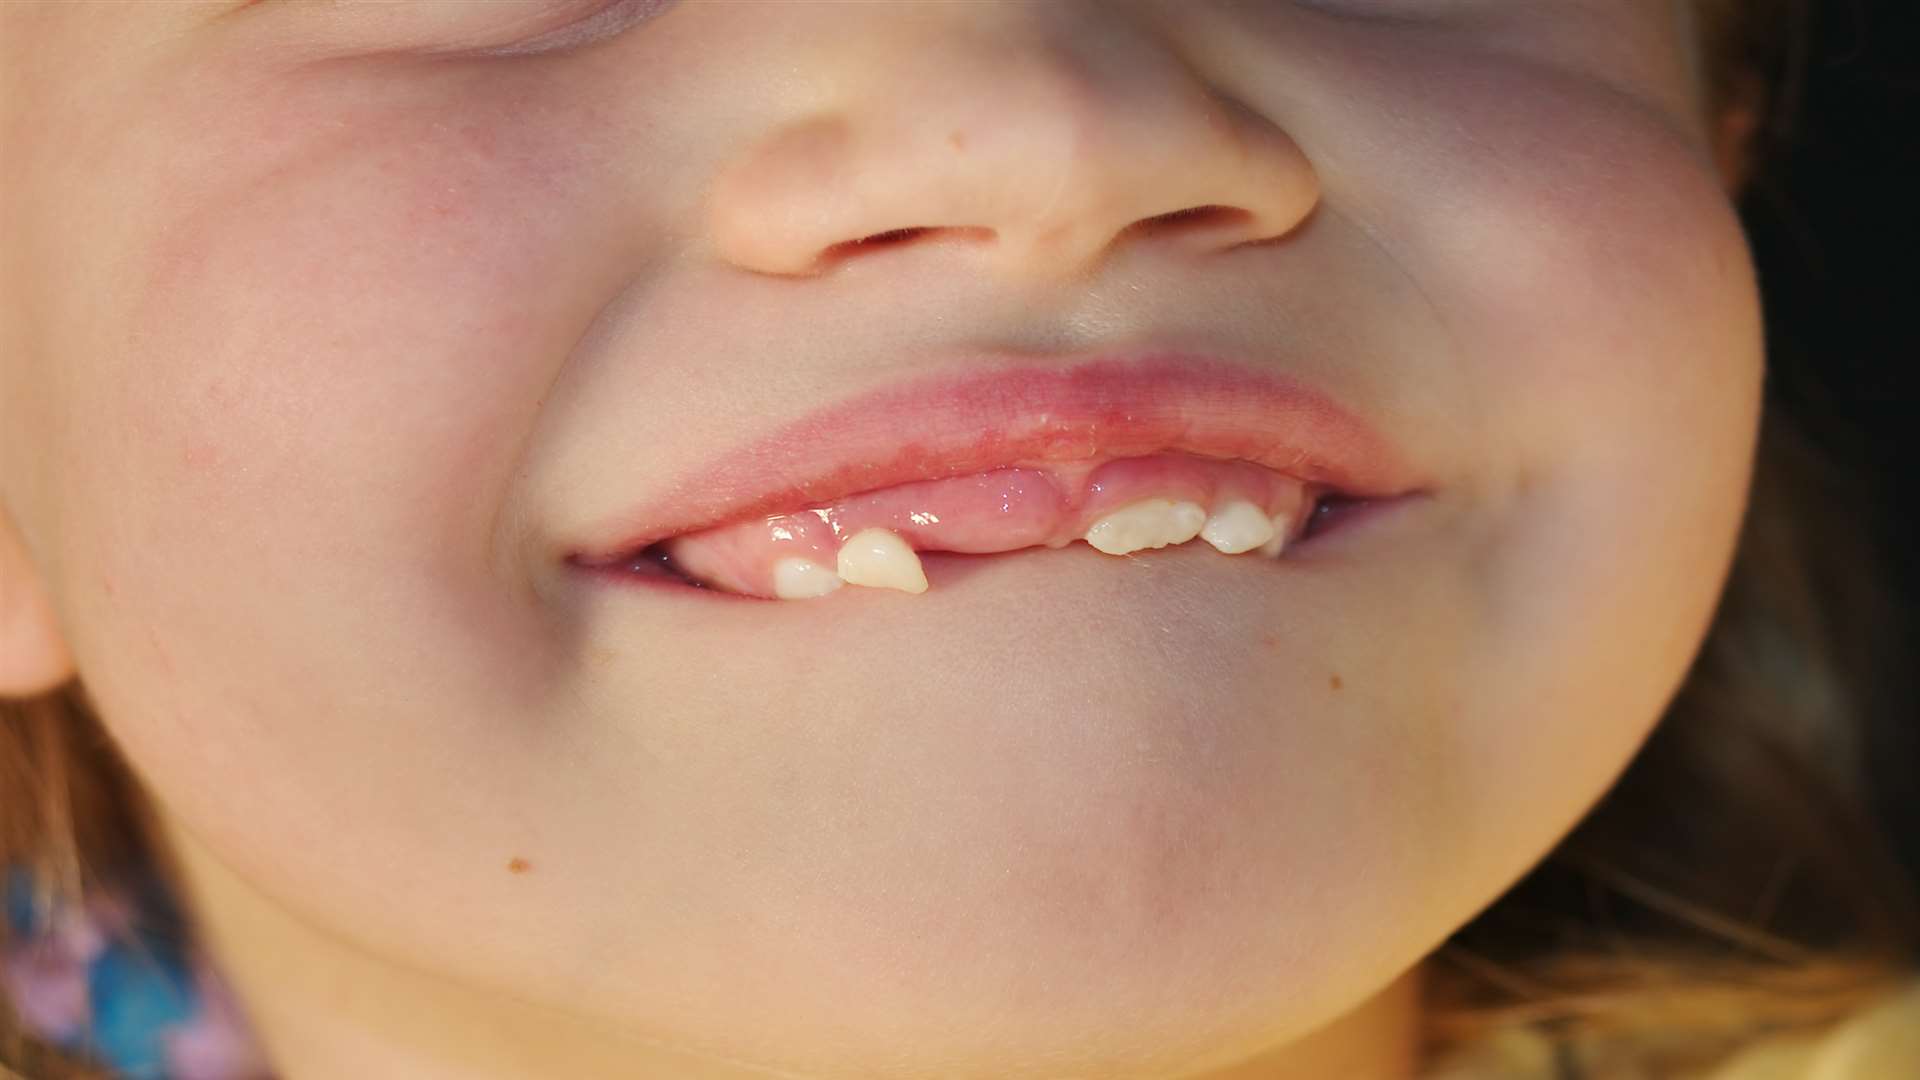 A child's baby teeth begin to loosen and fall out to make room for permanent teeth at about age six